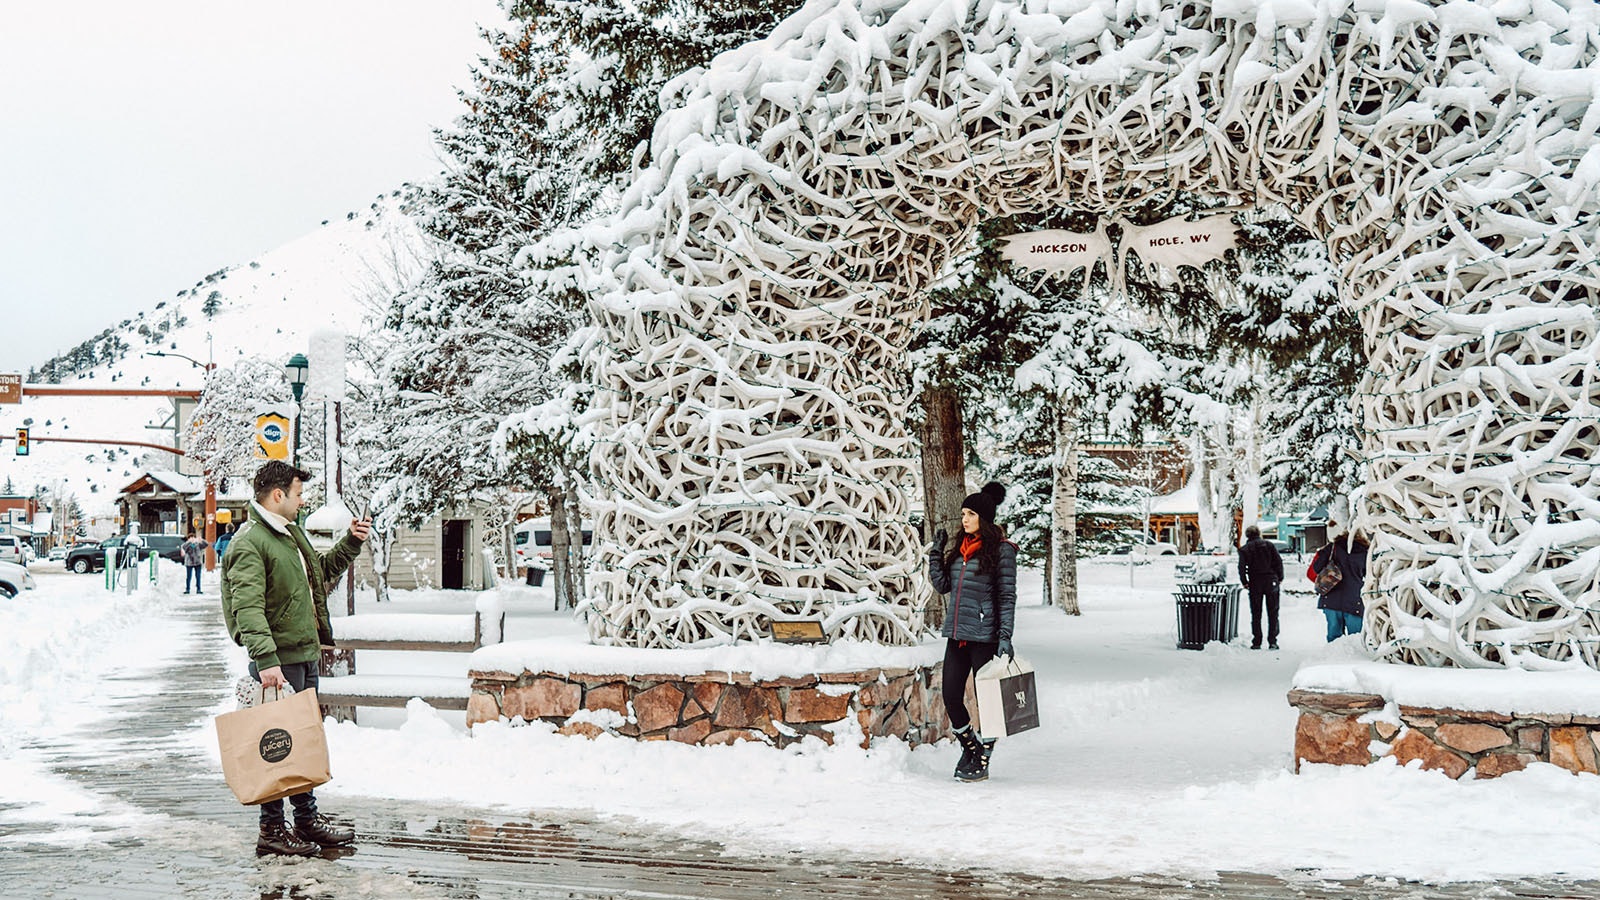 One of the most popular photo ops in Wyoming is at the antler arch on the southwest corner of the Jackson town square.